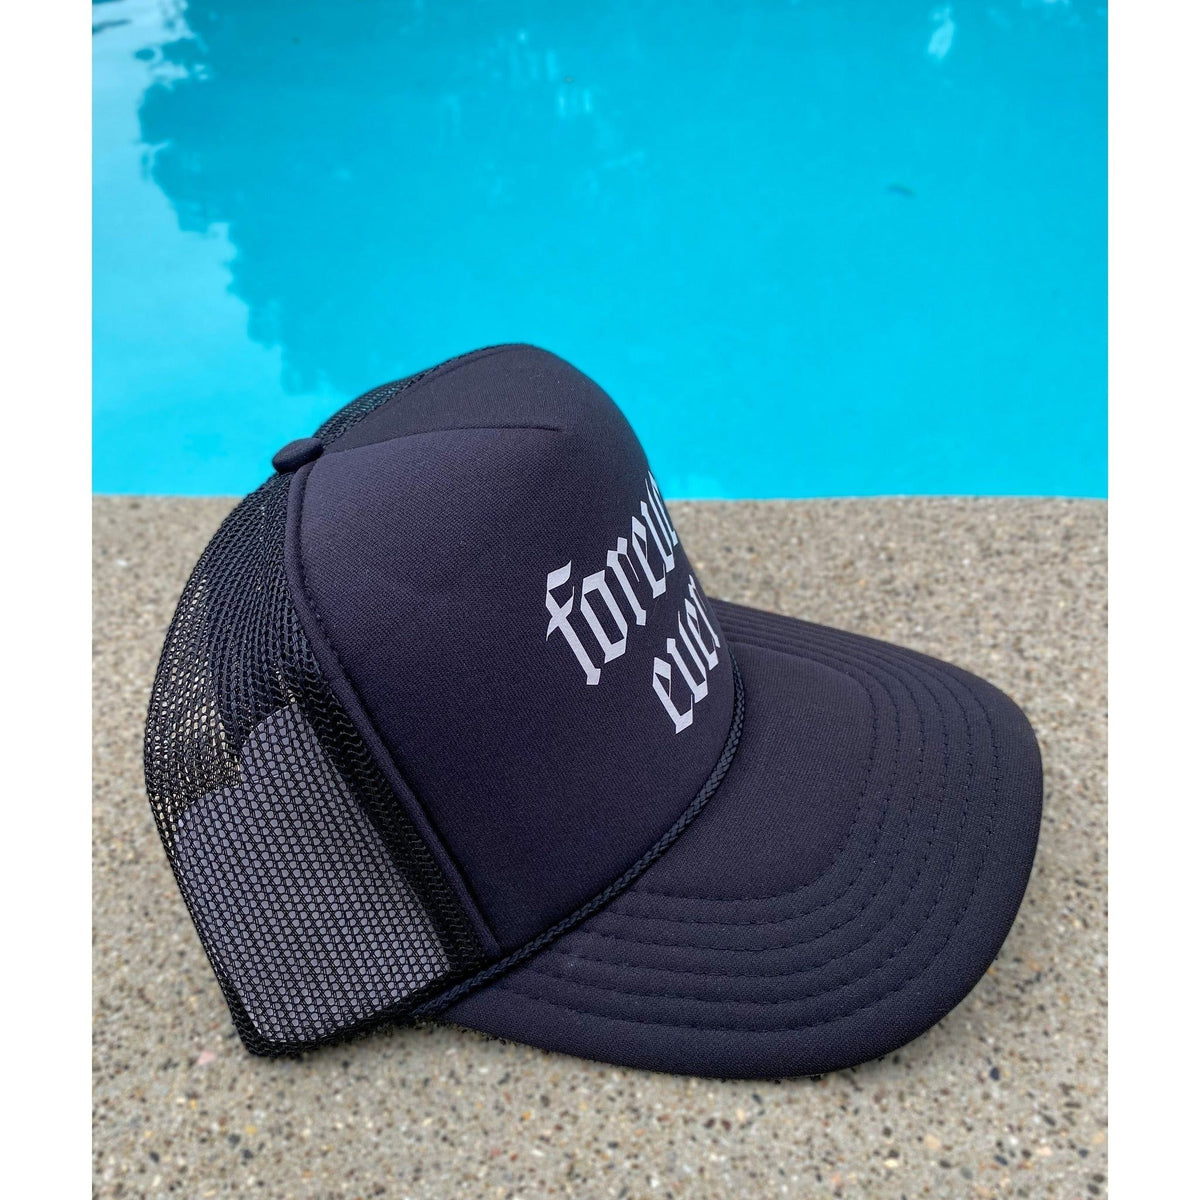 Forever Ever - Black Trucker Hat by Haute Sheet Hats TheFringeCultureCollective